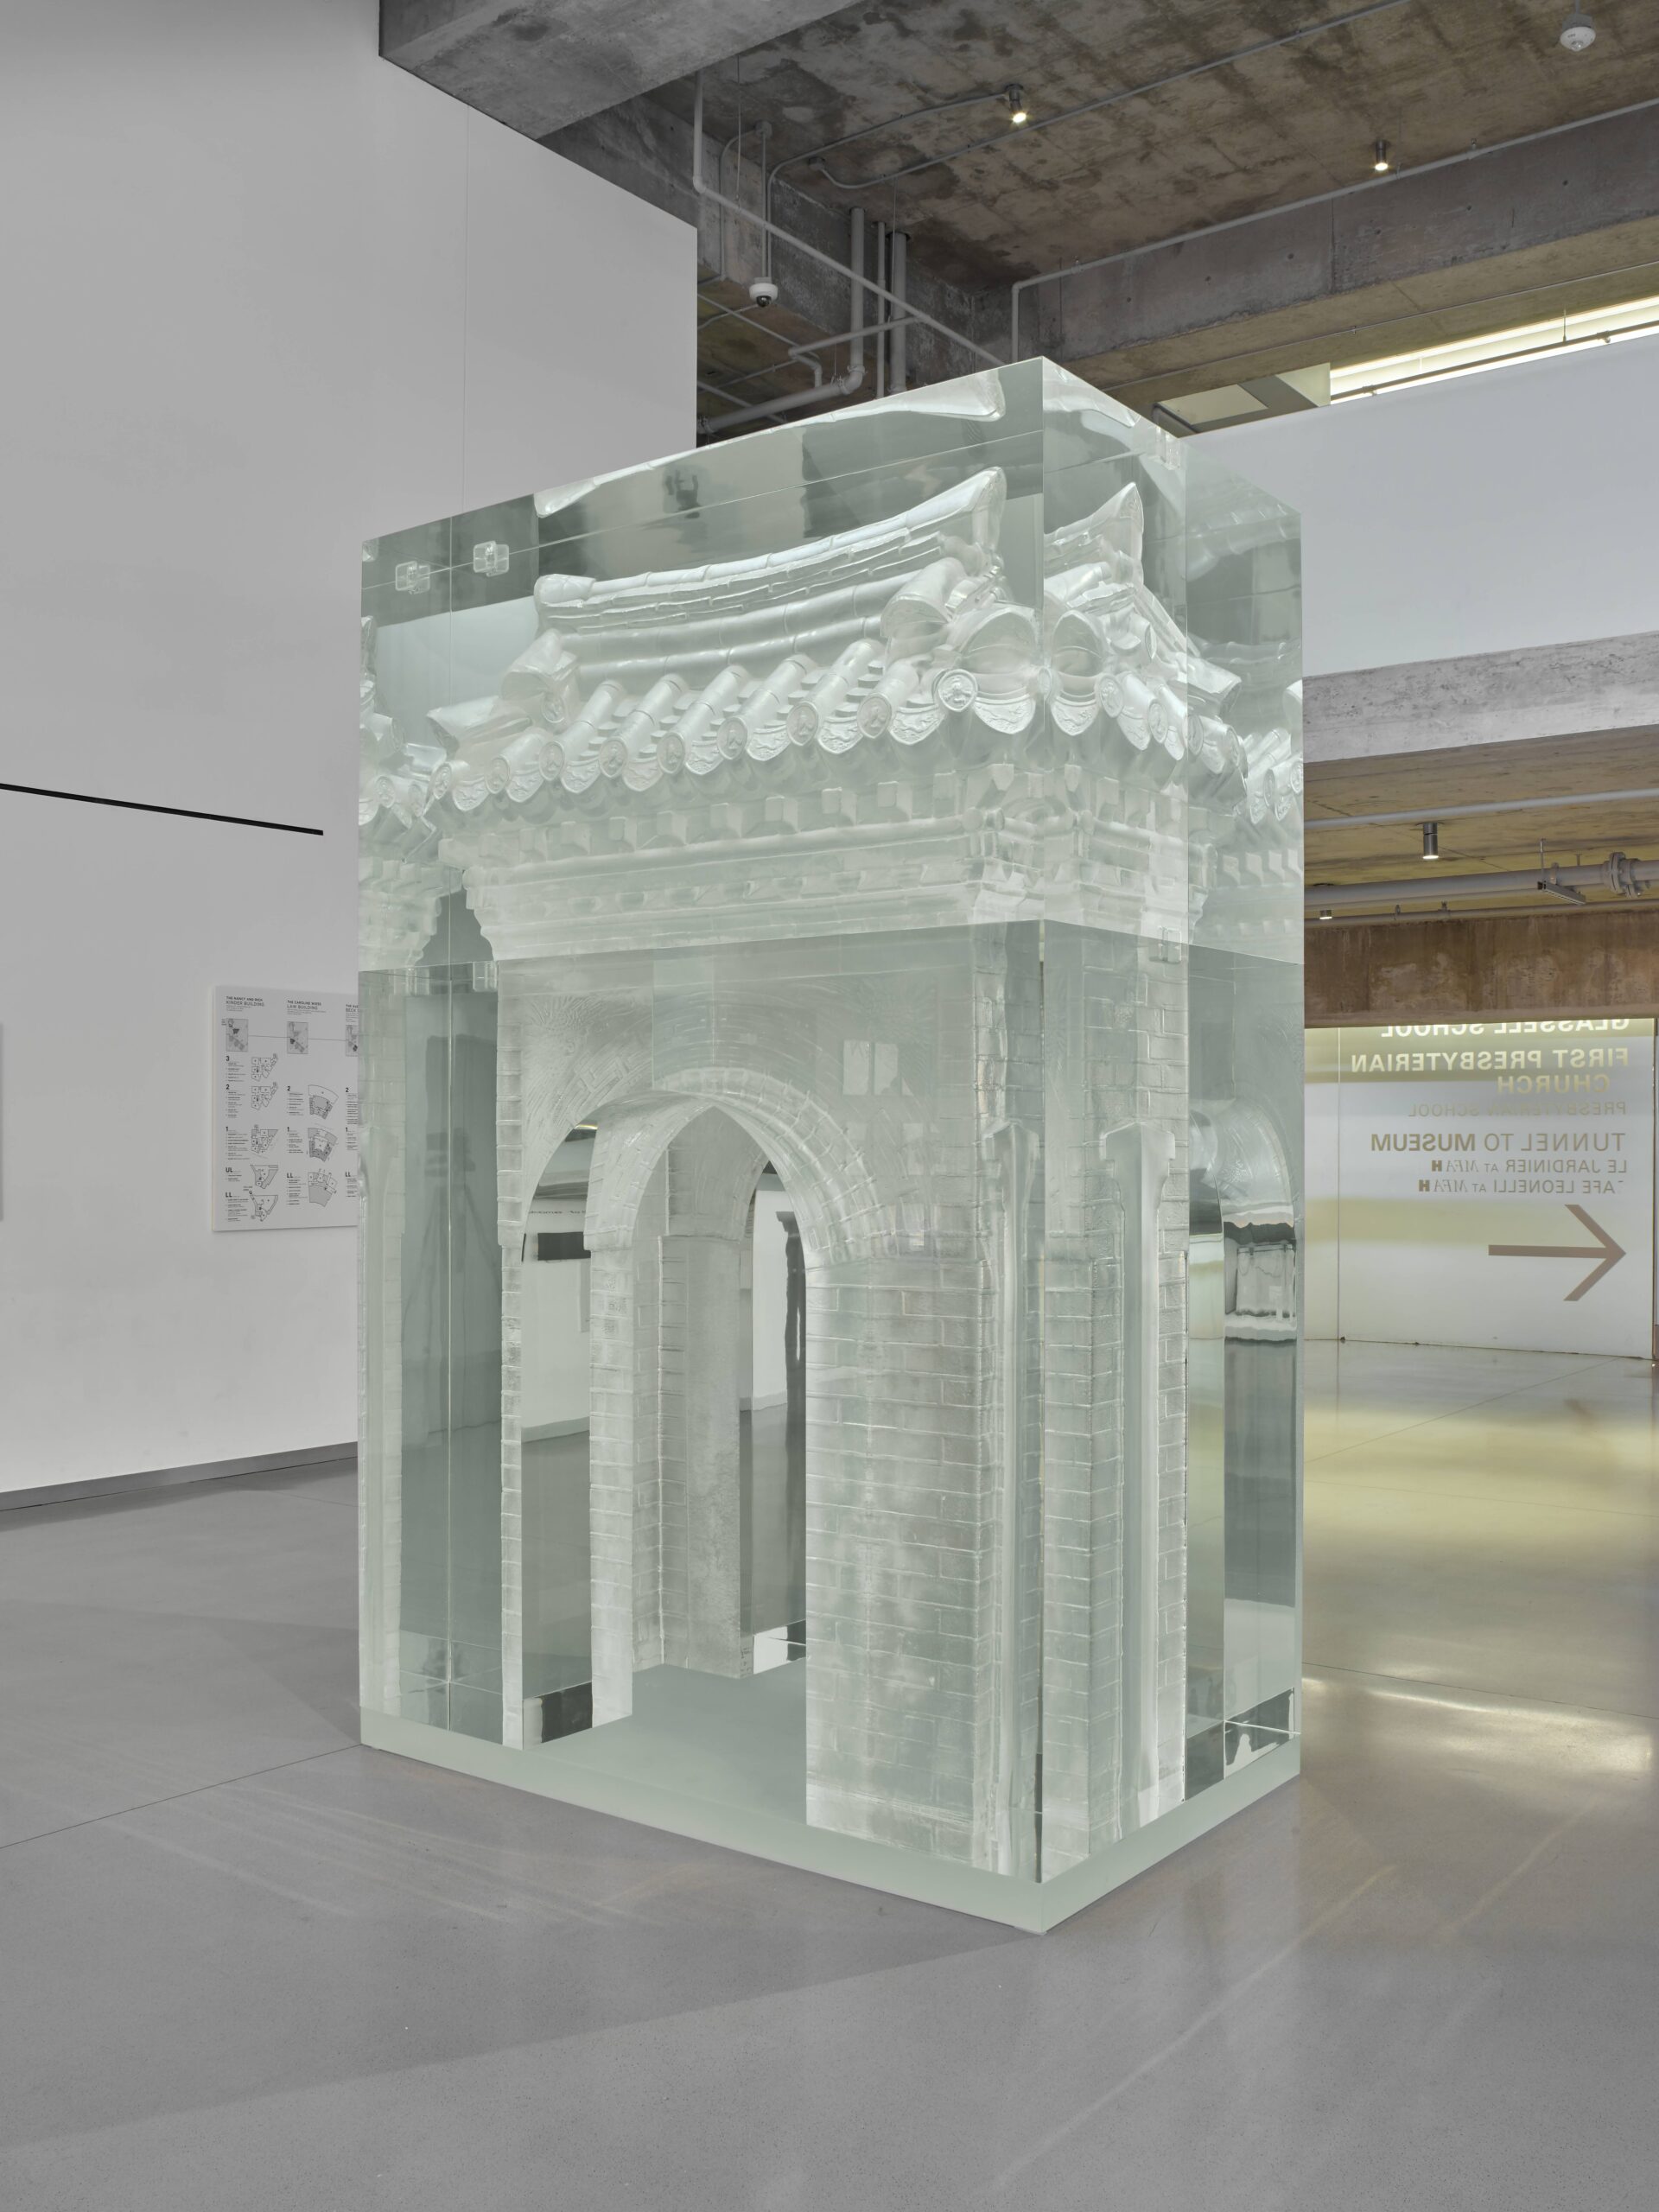 An installation by artist Do Ho Suh, titled "Portal," is displayed at the Museum of Fine Arts, Houston. The translucent sculpture, meticulously crafted to resemble an architectural gateway, stands tall with detailed carvings and a ghostly appearance, allowing viewers to see through its ethereal structure.